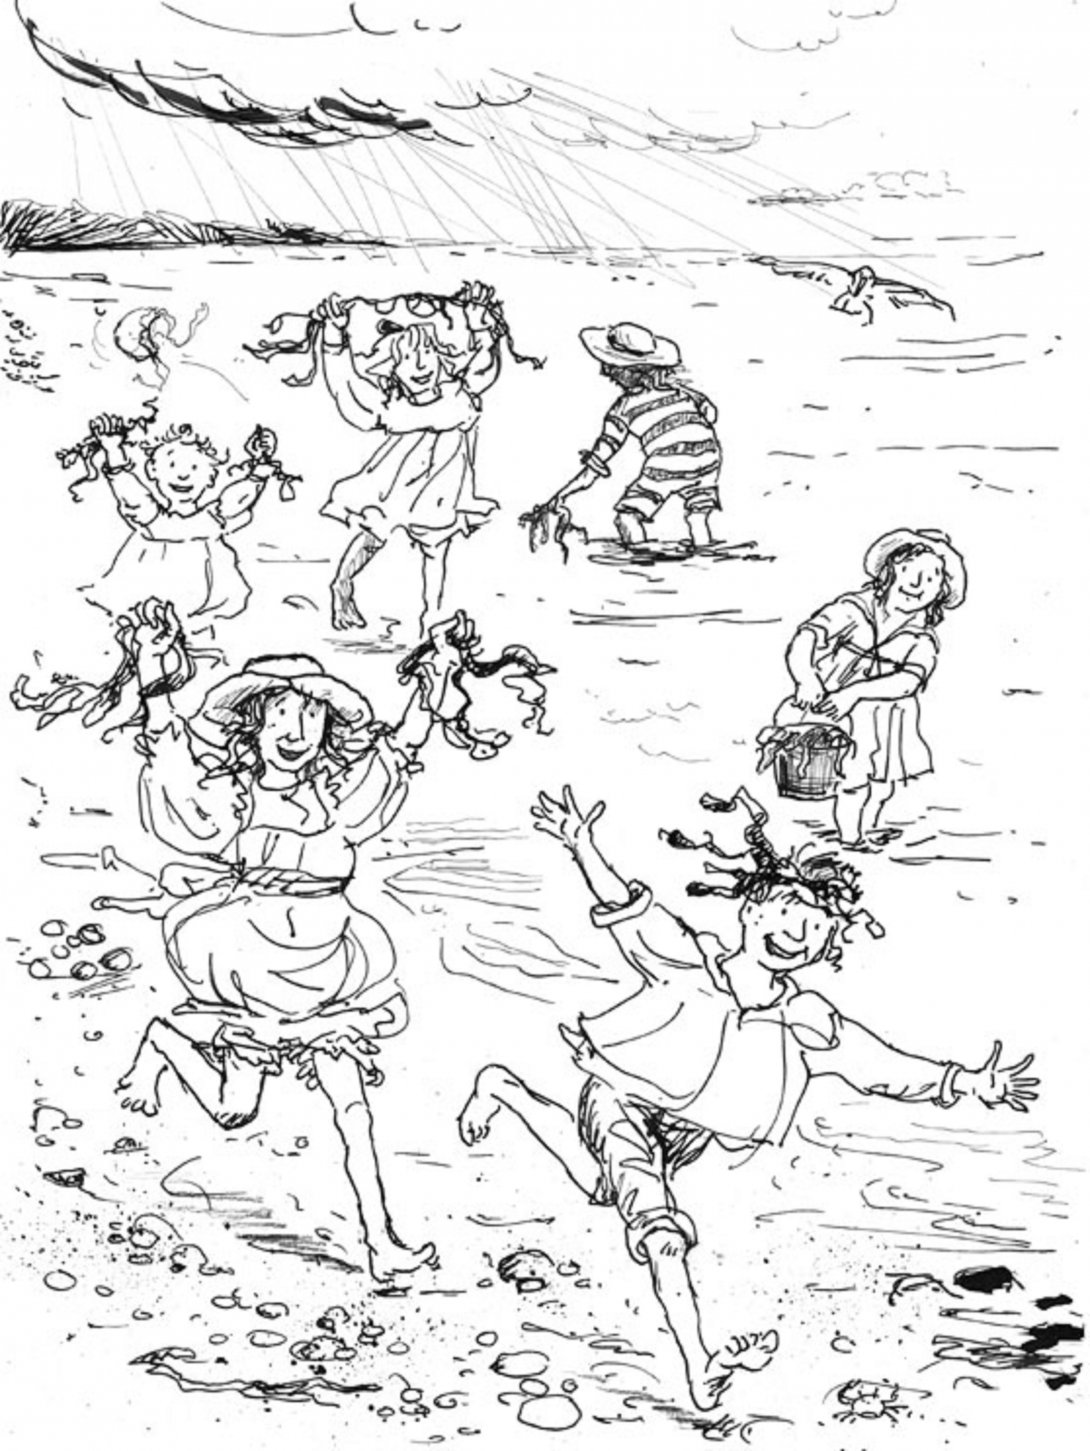 Sketch of children of various ages running and playing along the shore of the beach